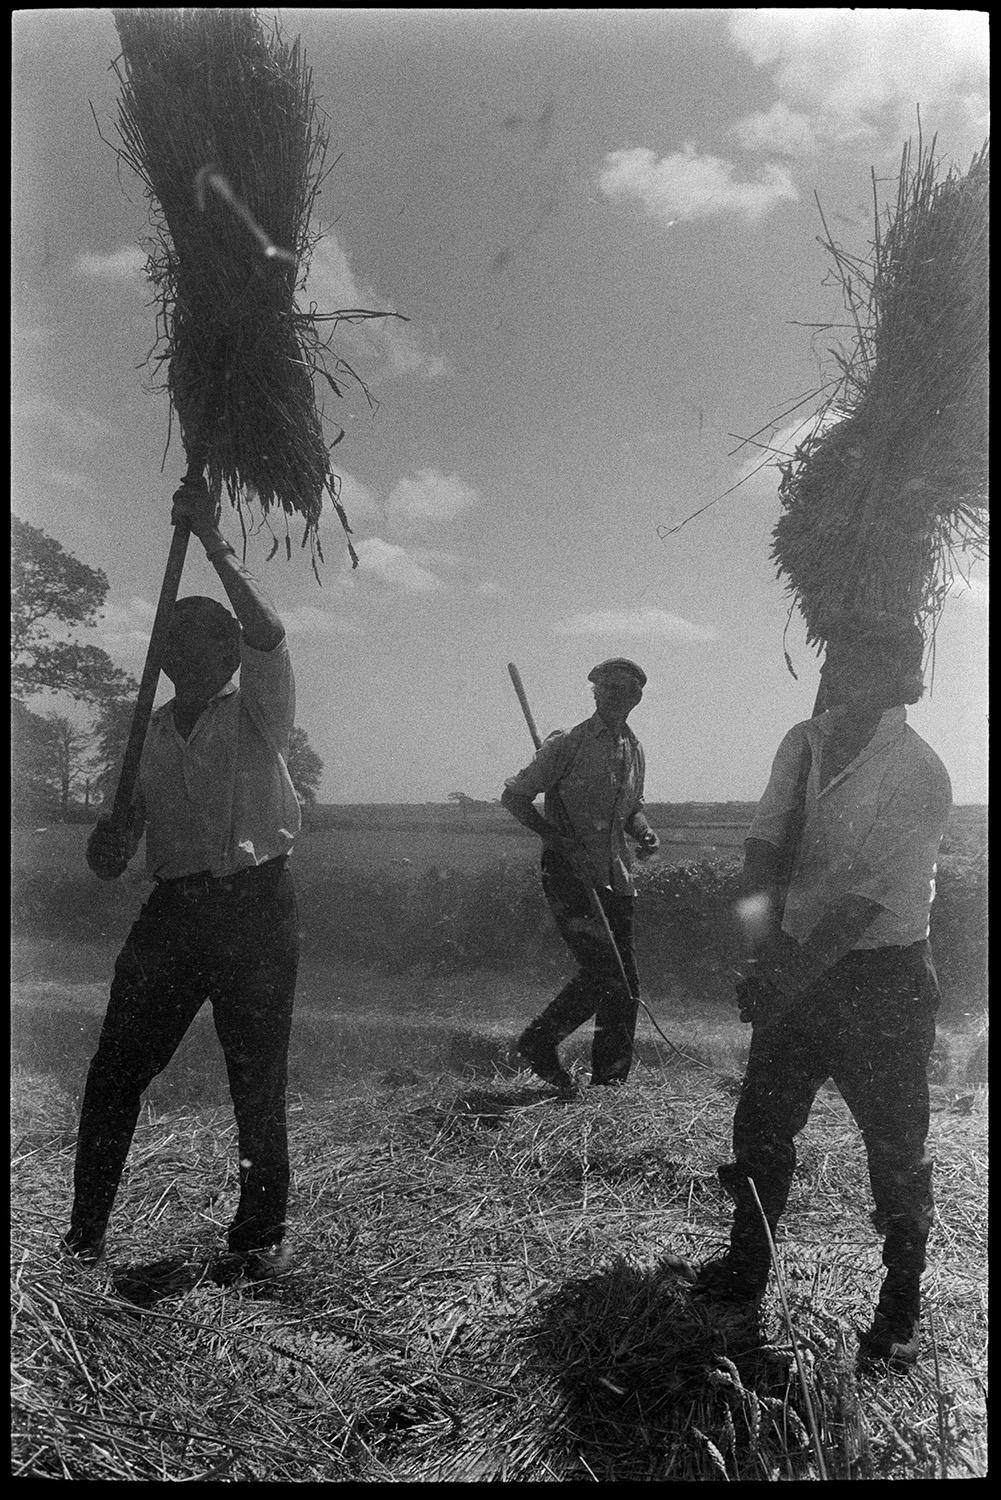 Reedcombing, men feeding wheat sheaves into machine from rick.
[Three men at Westacott, Riddlecombe lifting wheat sheaves into a reed comber machine, using pitchforks, in a field in bright sunlight.]